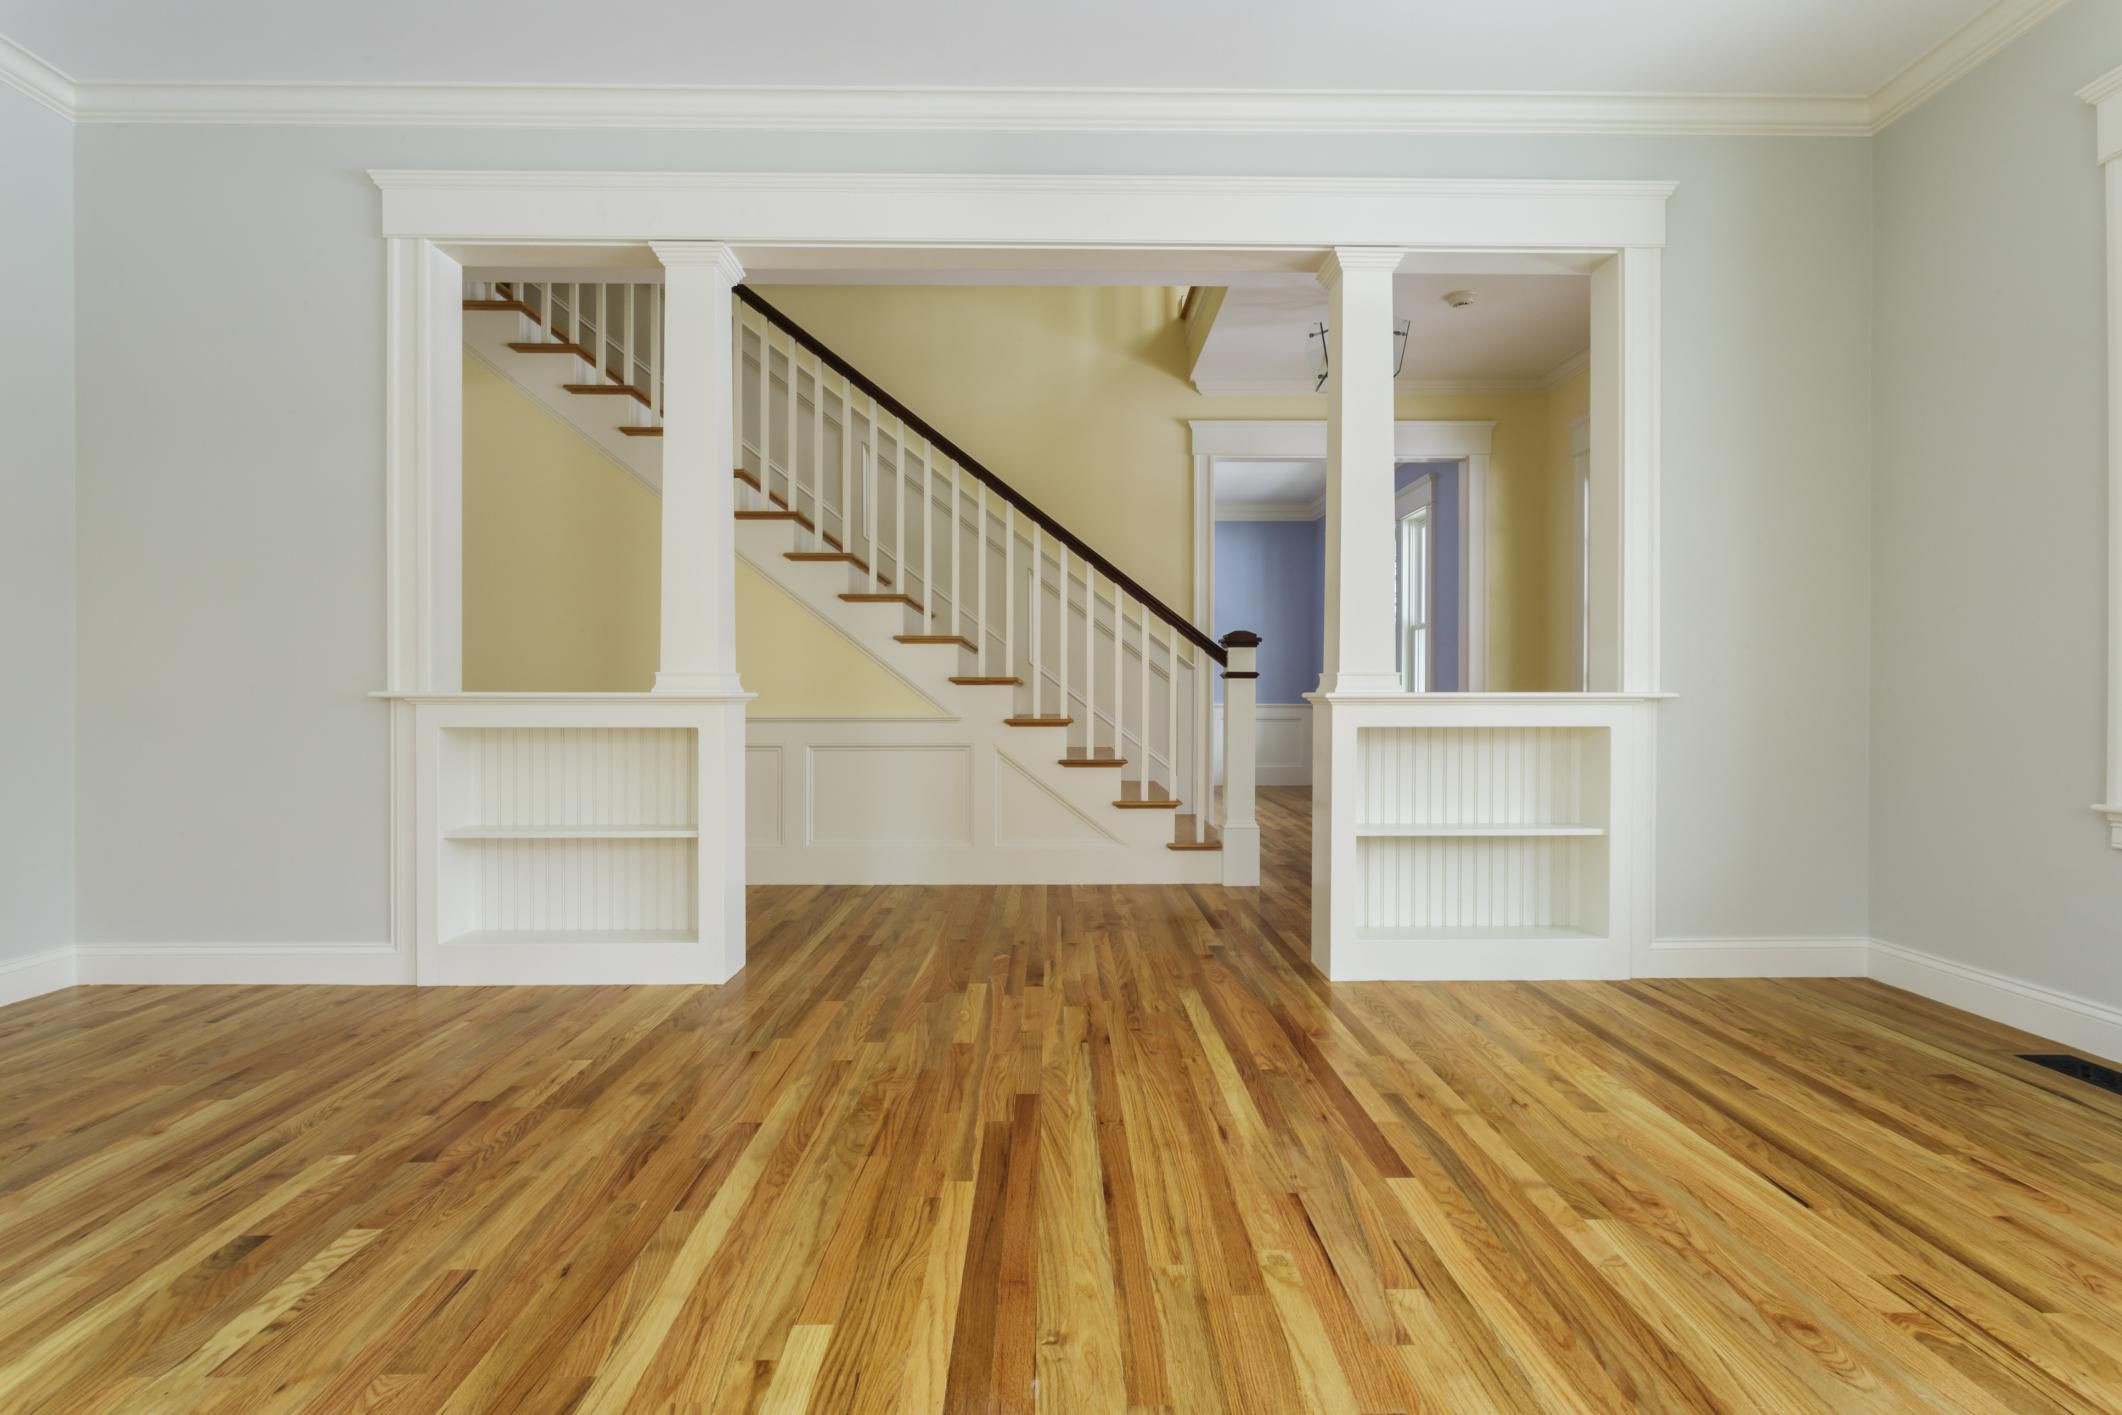 20 Stylish Hardwood Floor Price Per Square Foot 2024 free download hardwood floor price per square foot of guide to solid hardwood floors for 168686571 56a49f213df78cf772834e24